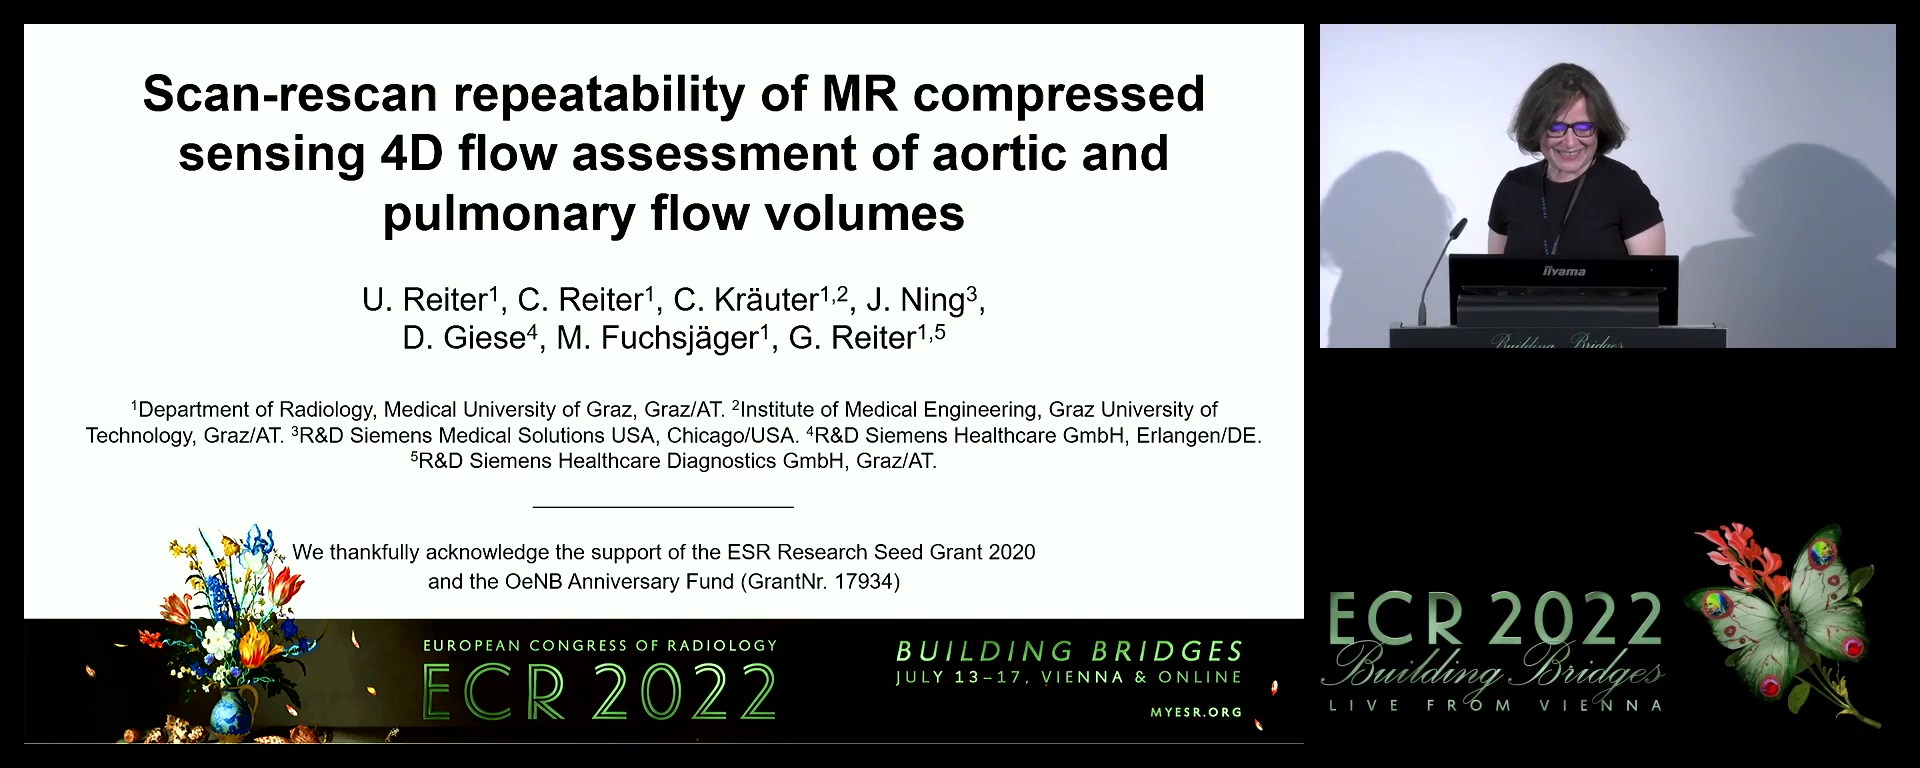 Scan-rescan repeatability of MR compressed sensing 4D flow assessment of aortic and pulmonary flow volumes - Ursula Reiter, Graz / AT